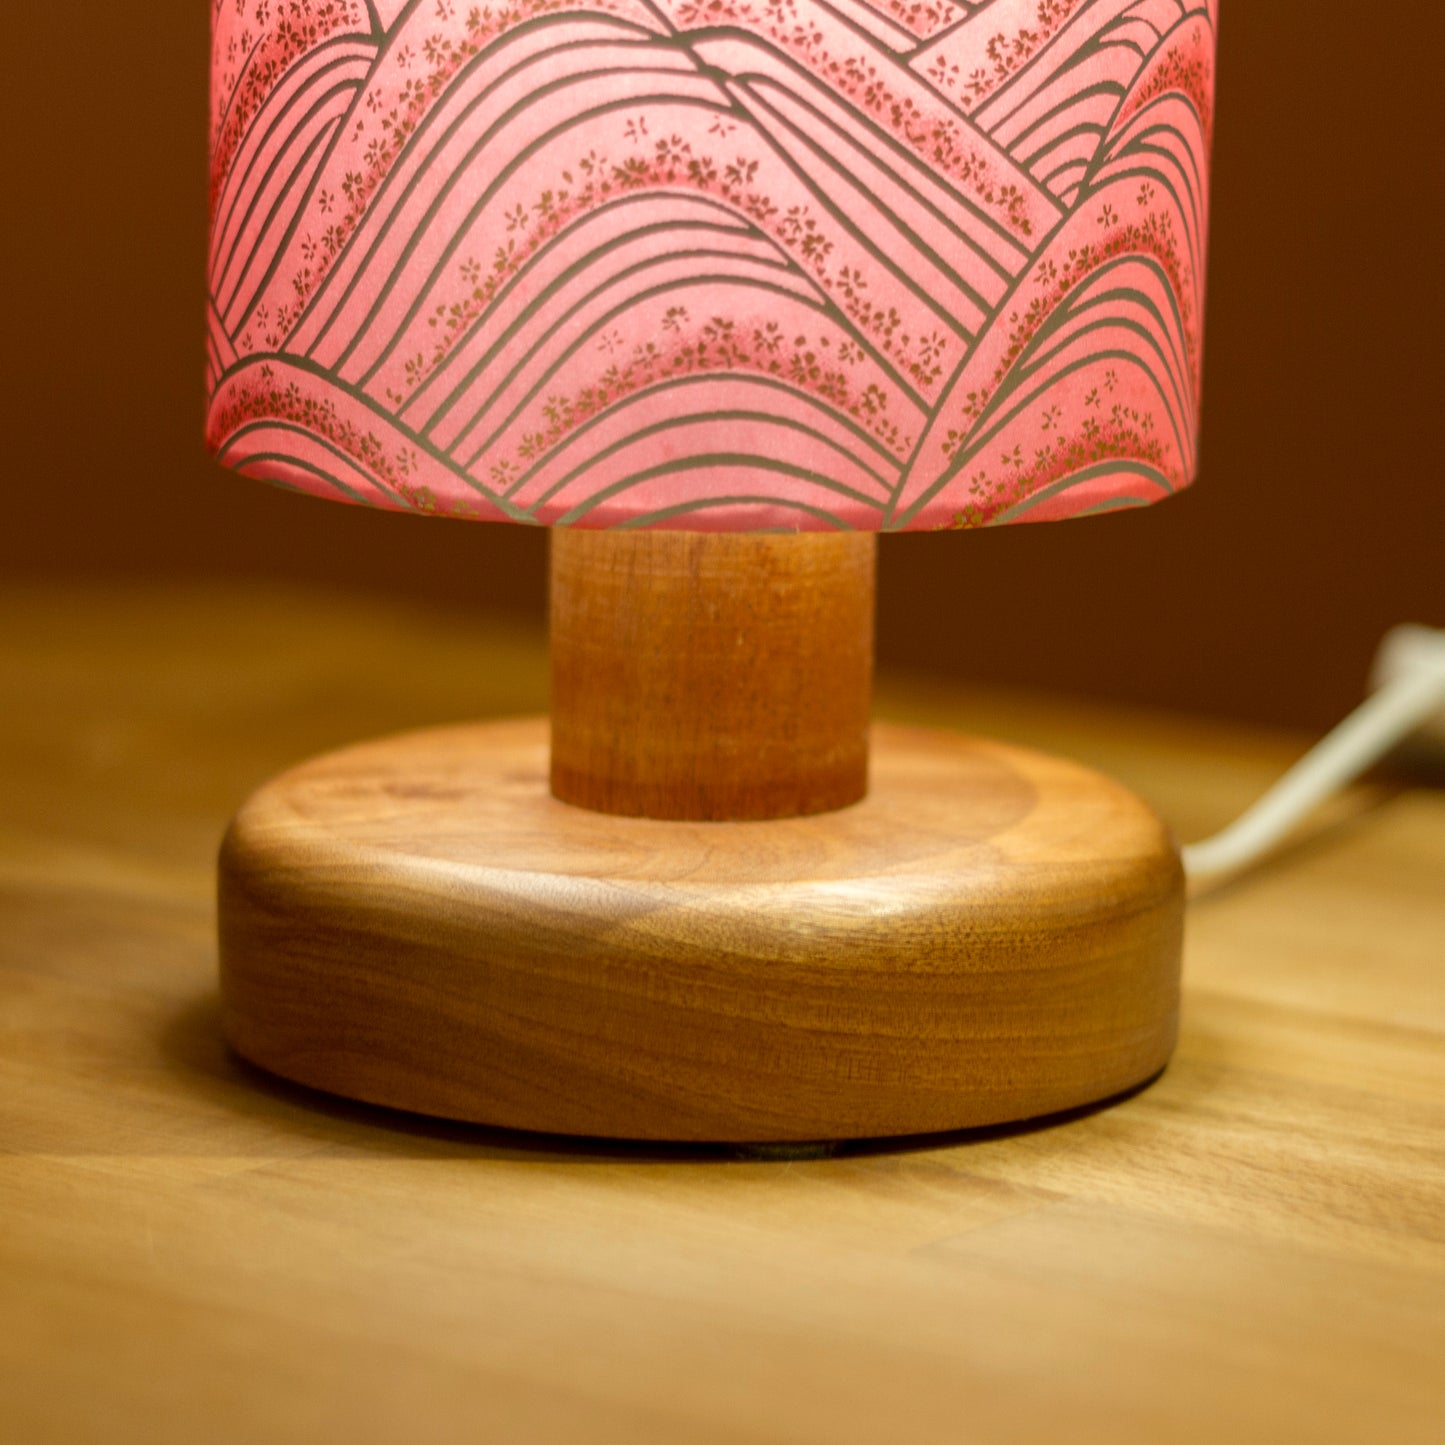 Round Sapele Table Lamp with 15cm x 30cm Lamp Shade in Pink Hills Washi - W04